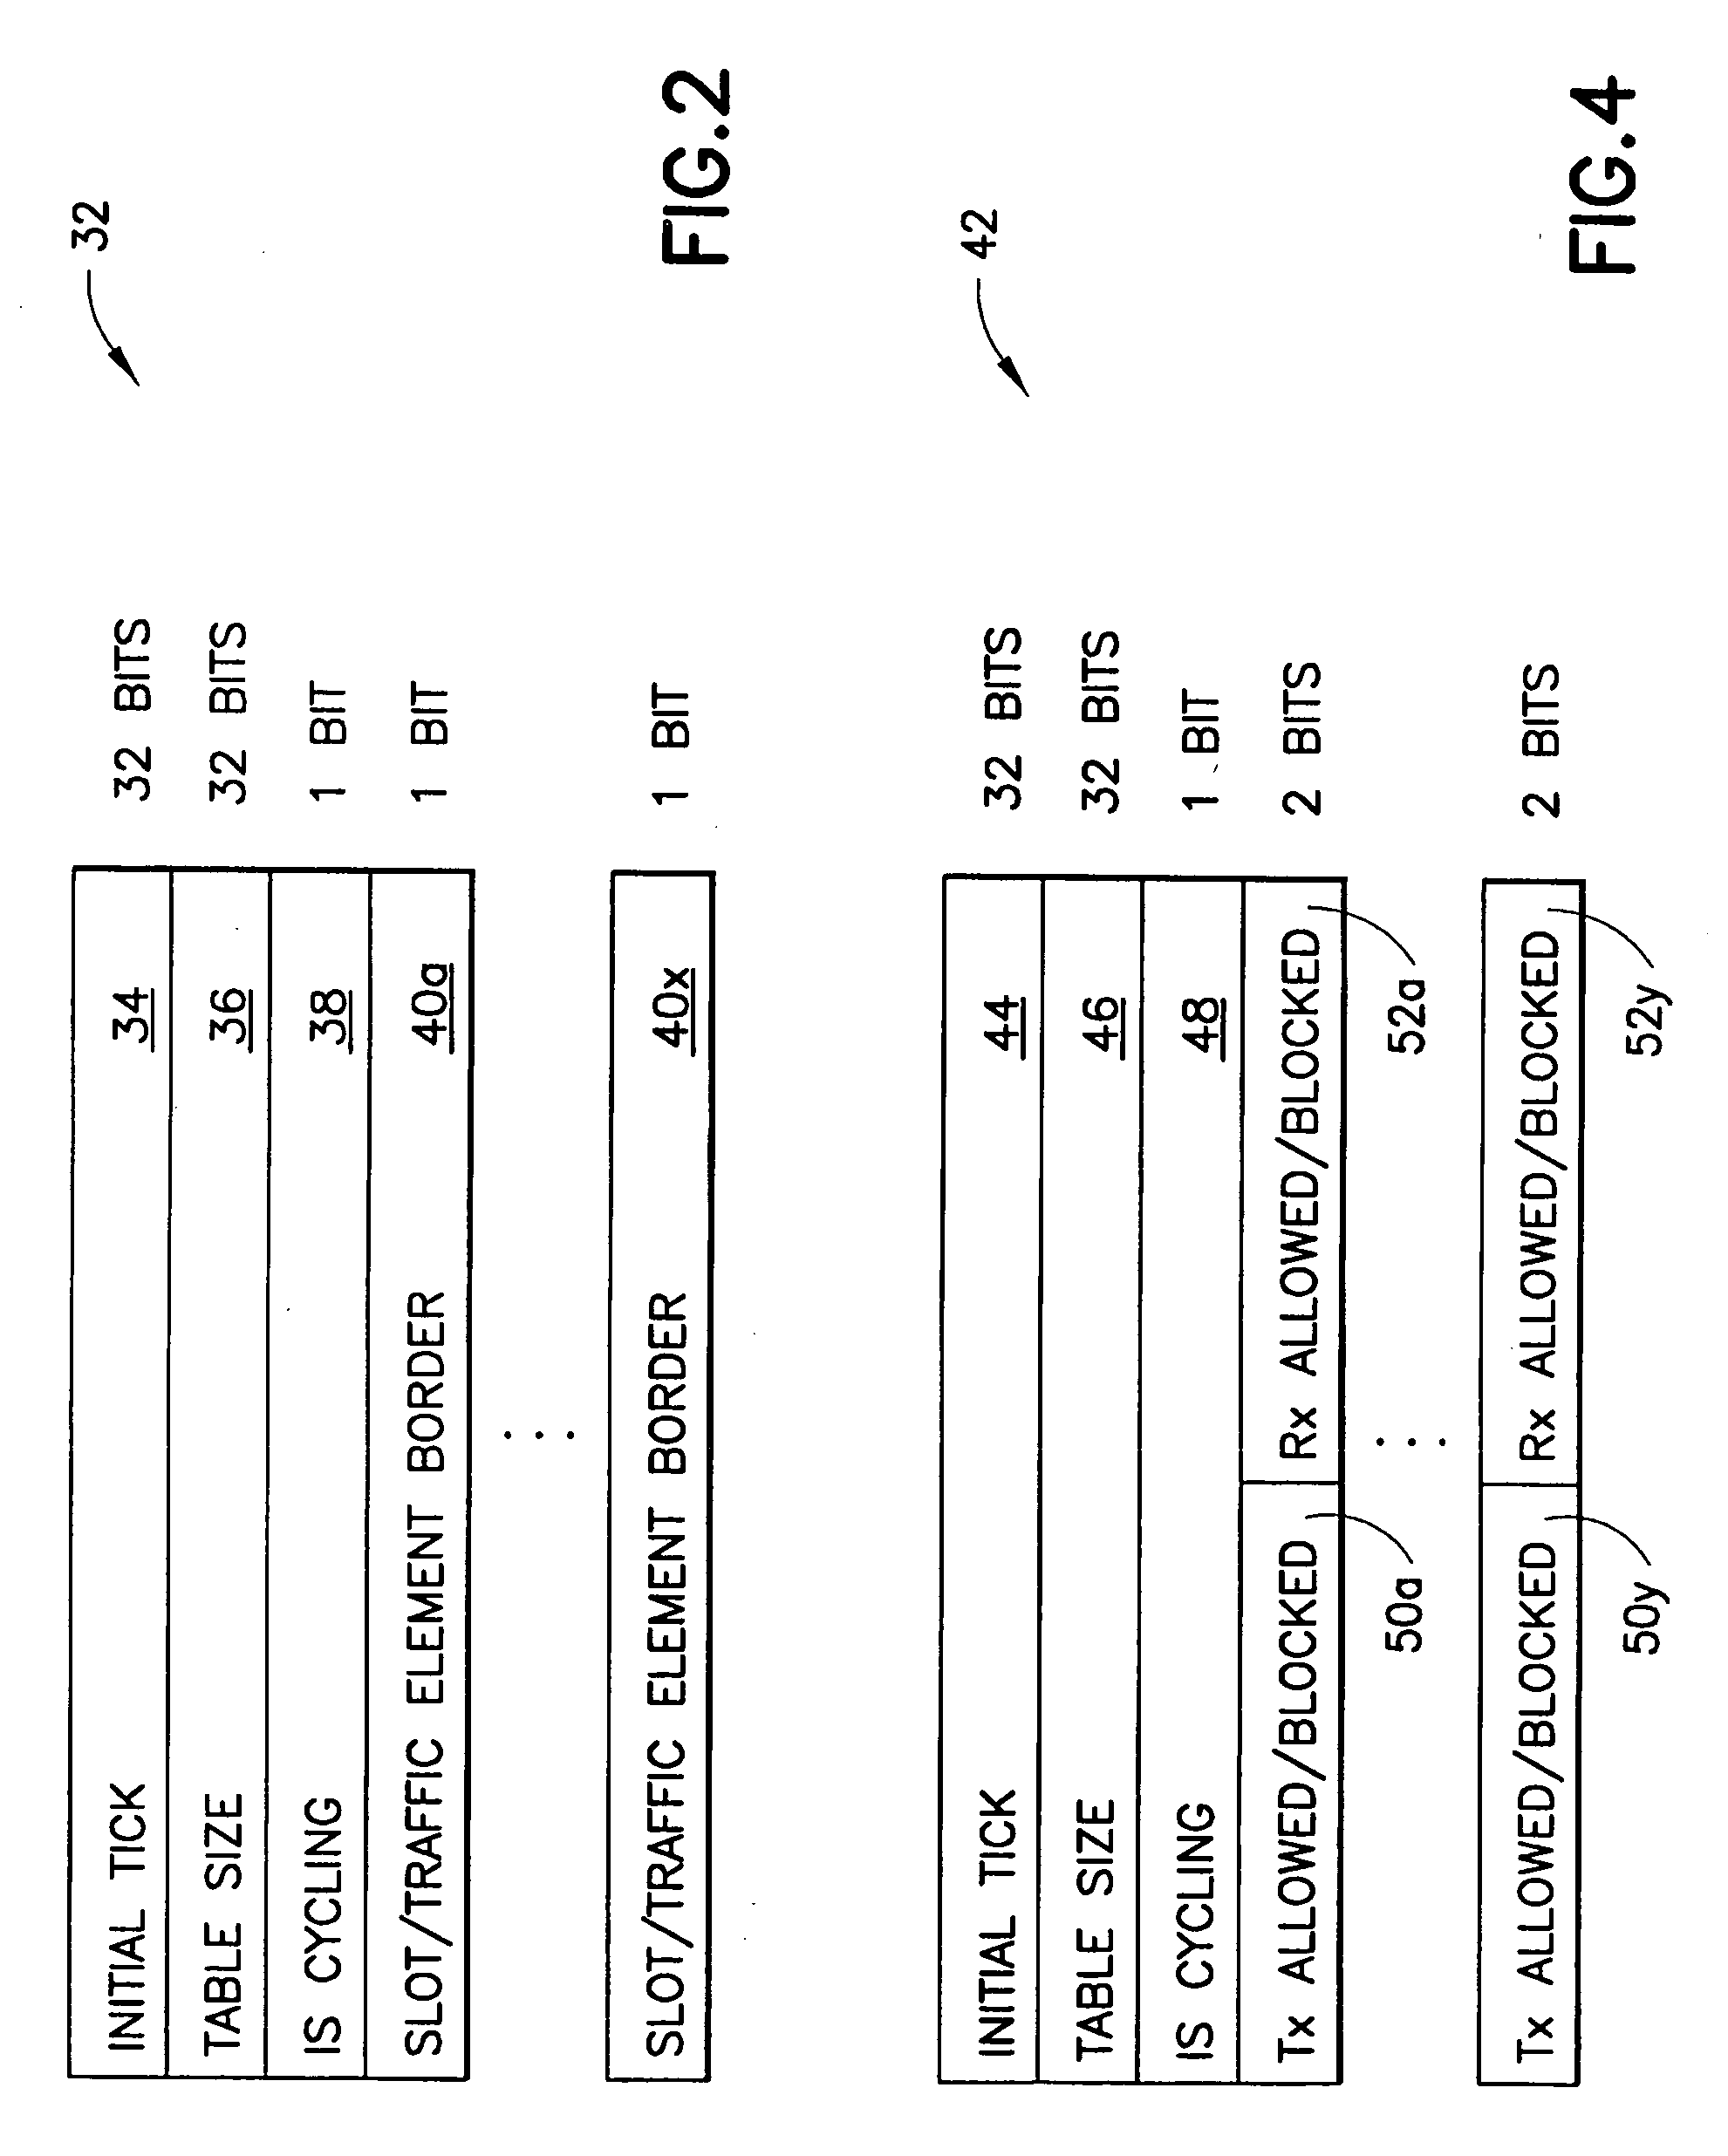 Apparatus, methods and computer program products providing pattern masking and traffic rule matrix scheduling for multiradio control